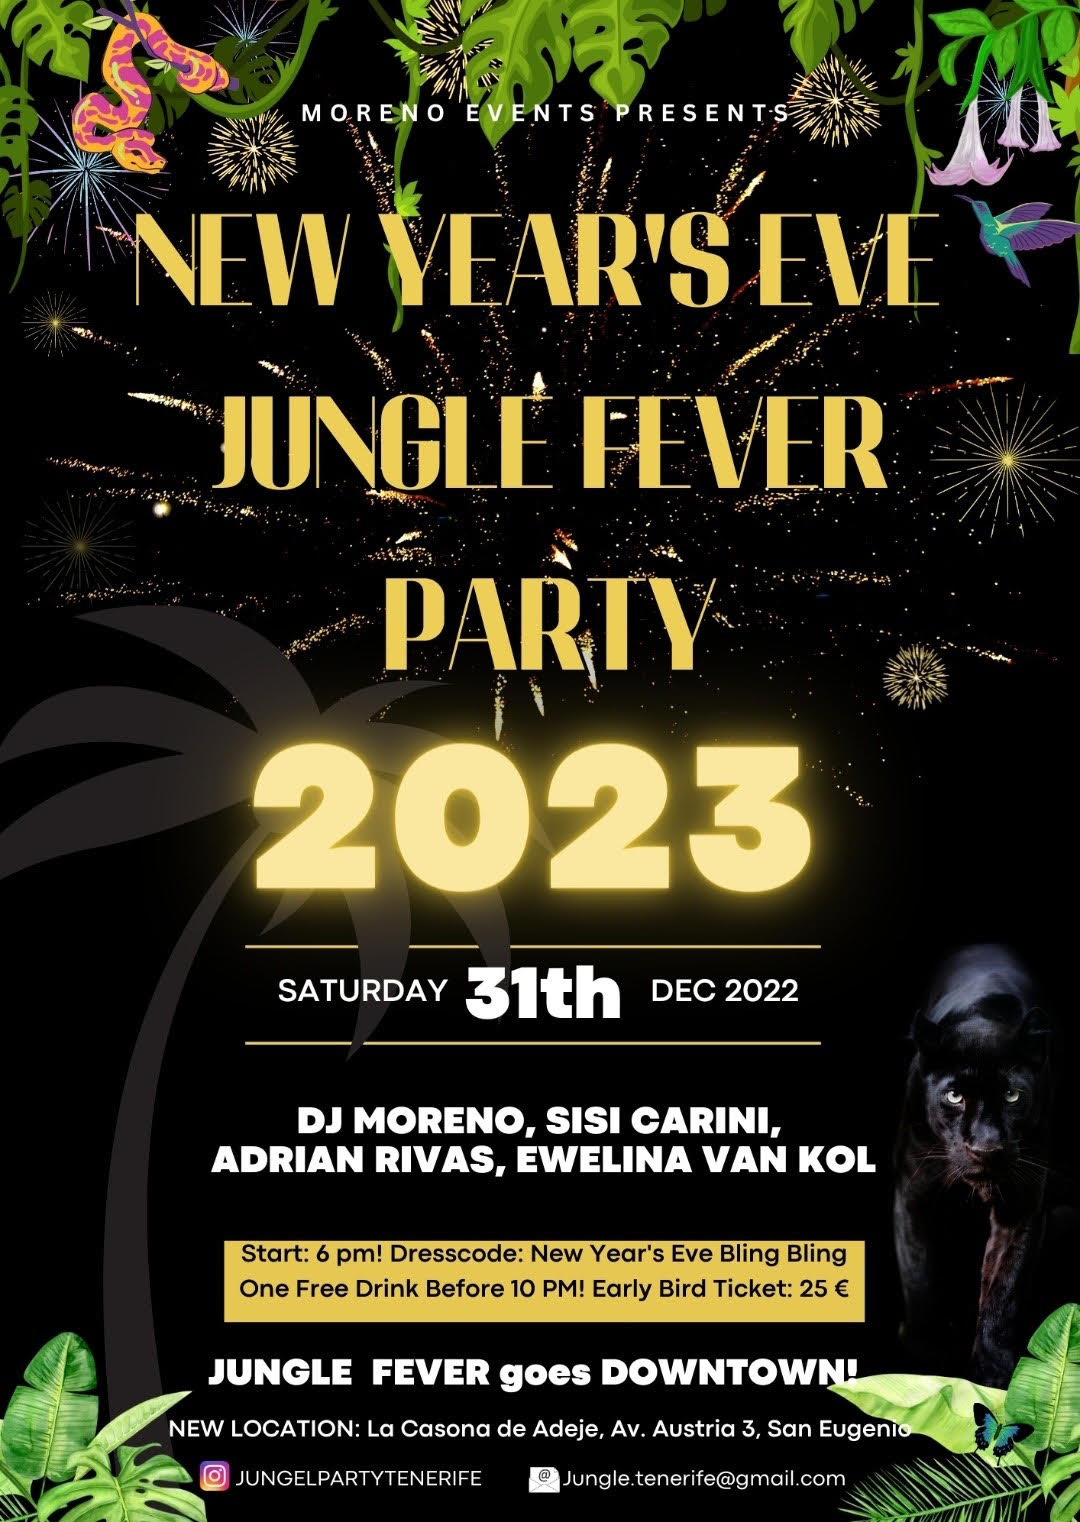 NEW YEARS EVE 2022 – NOMADS JUNGLE FEVER PARTY